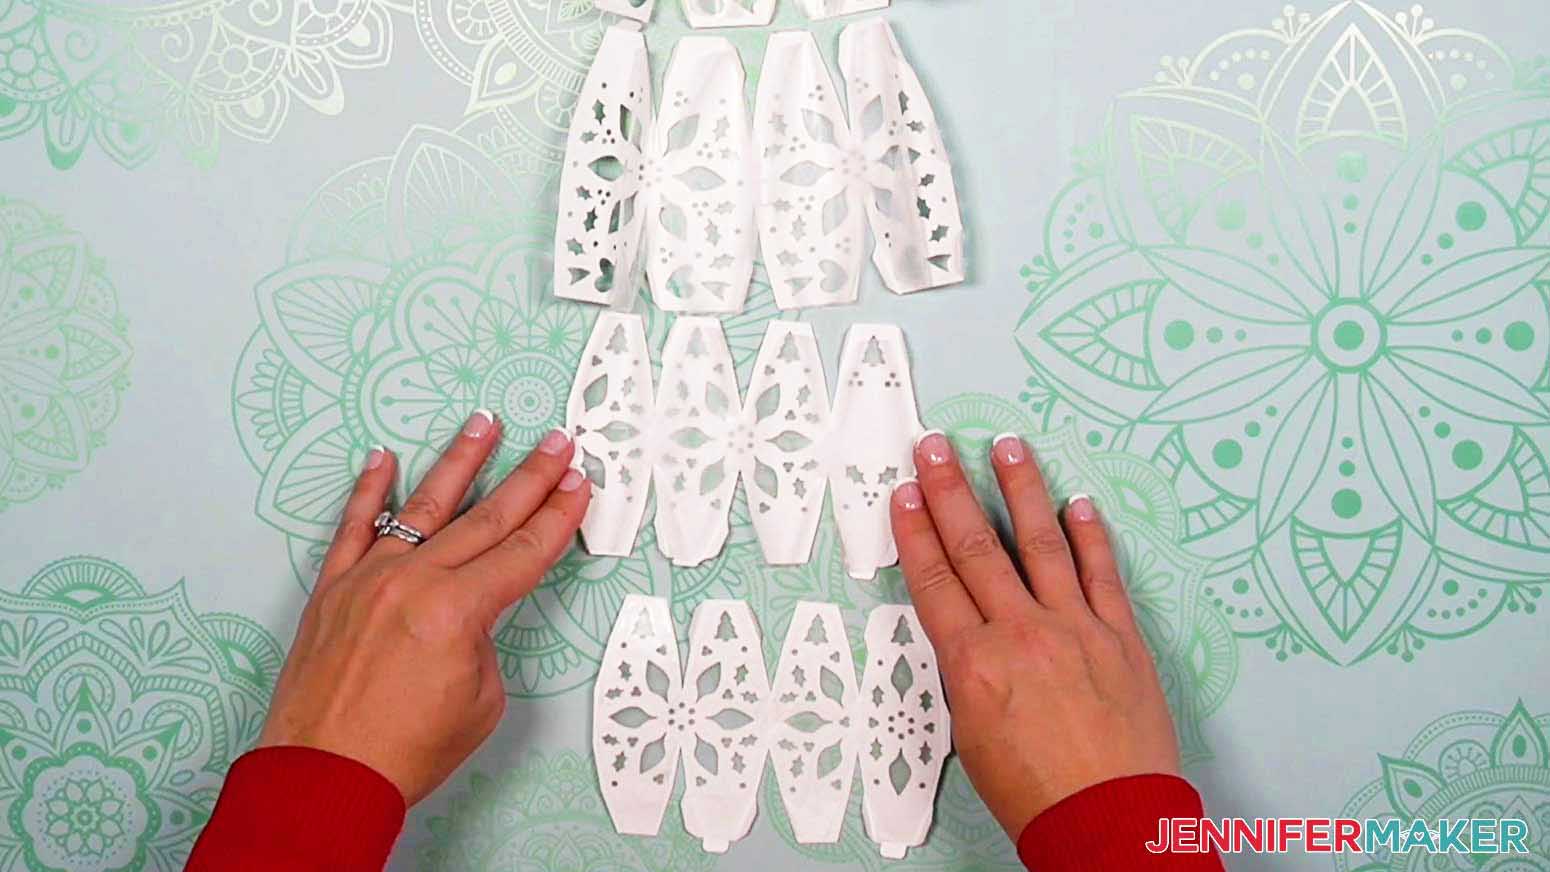 Line up the four wax paper pieces with the four light up snowman's head and body pieces so the edges match up, leaving only a thin border around the outside of each wax paper piece